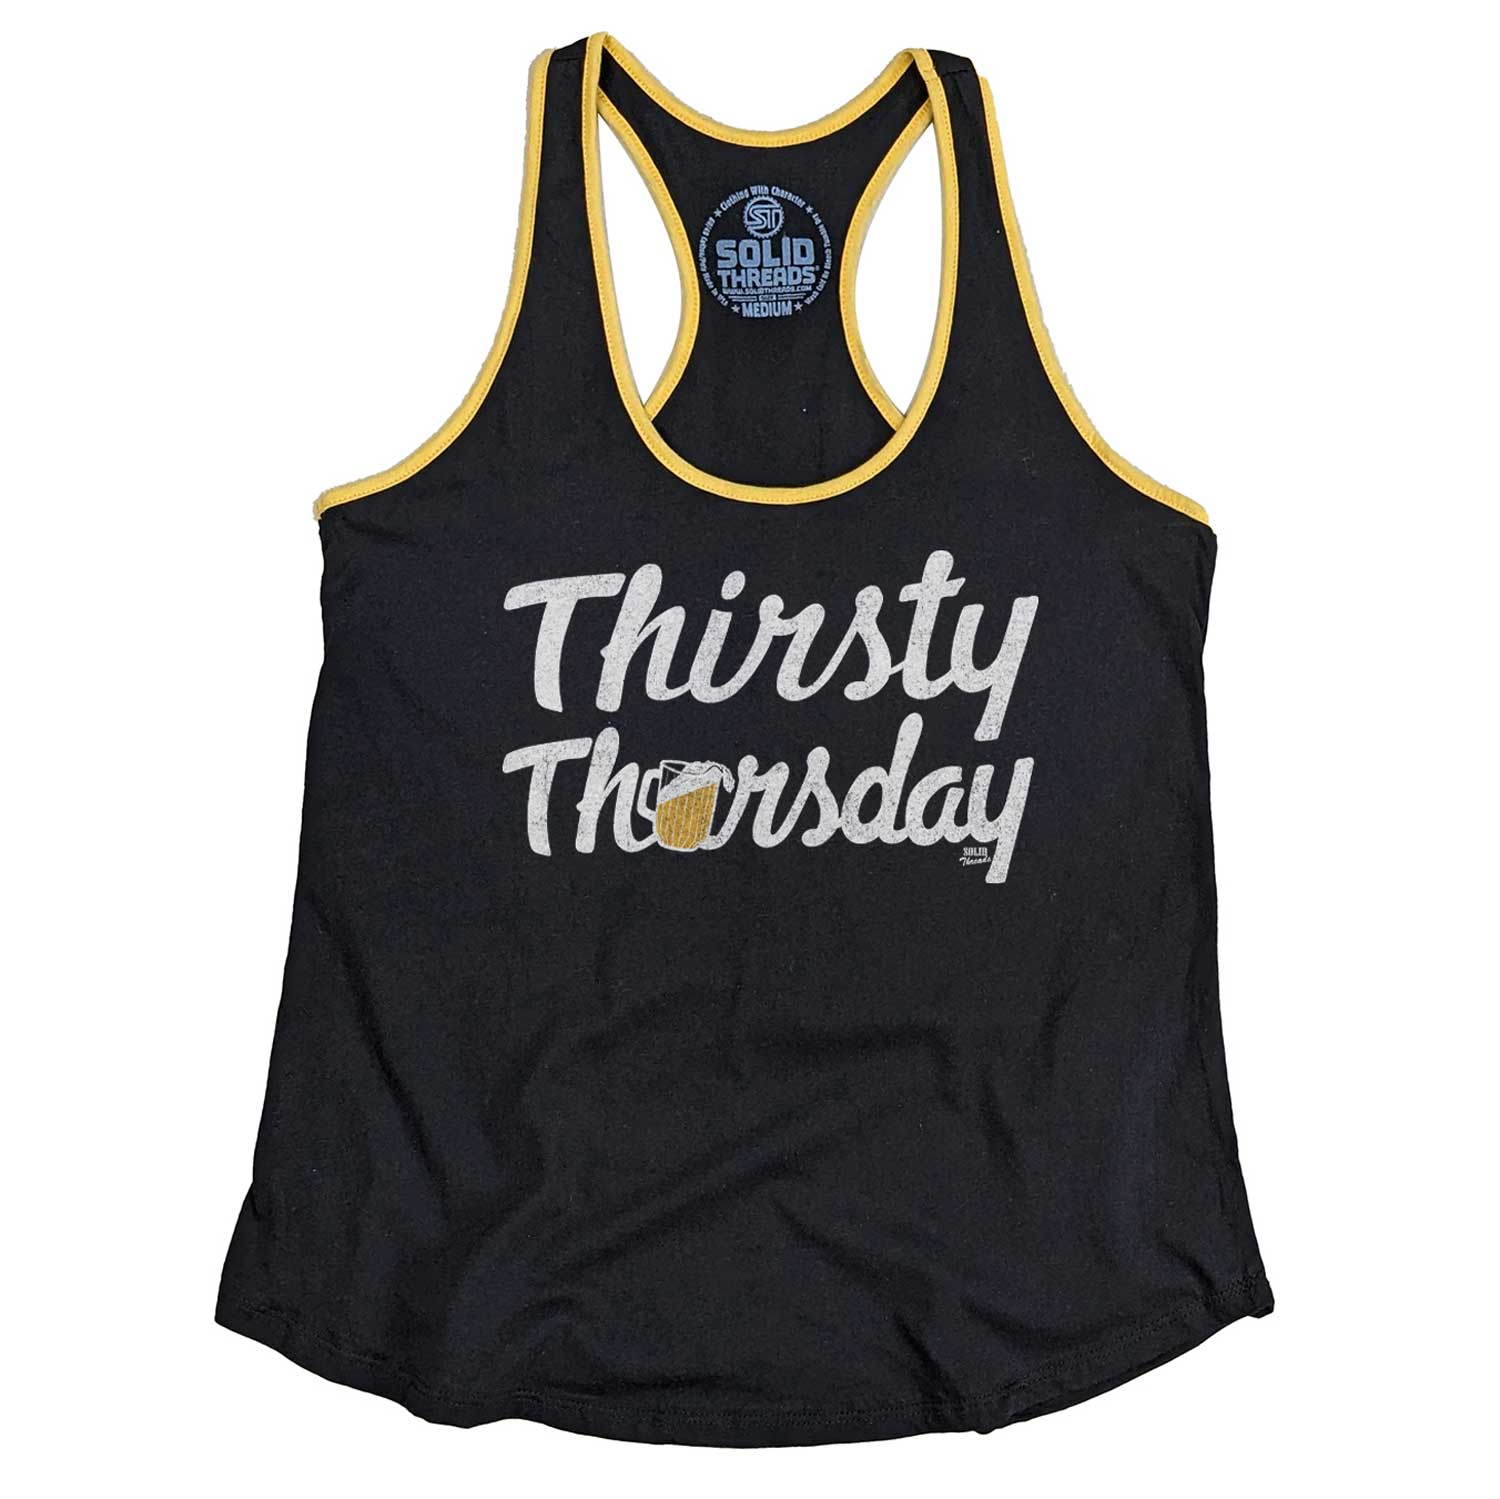 Women's Thirsty Thursday Vintage Graphic Tank Top | Funny Drinking T-shirt | Solid Threads